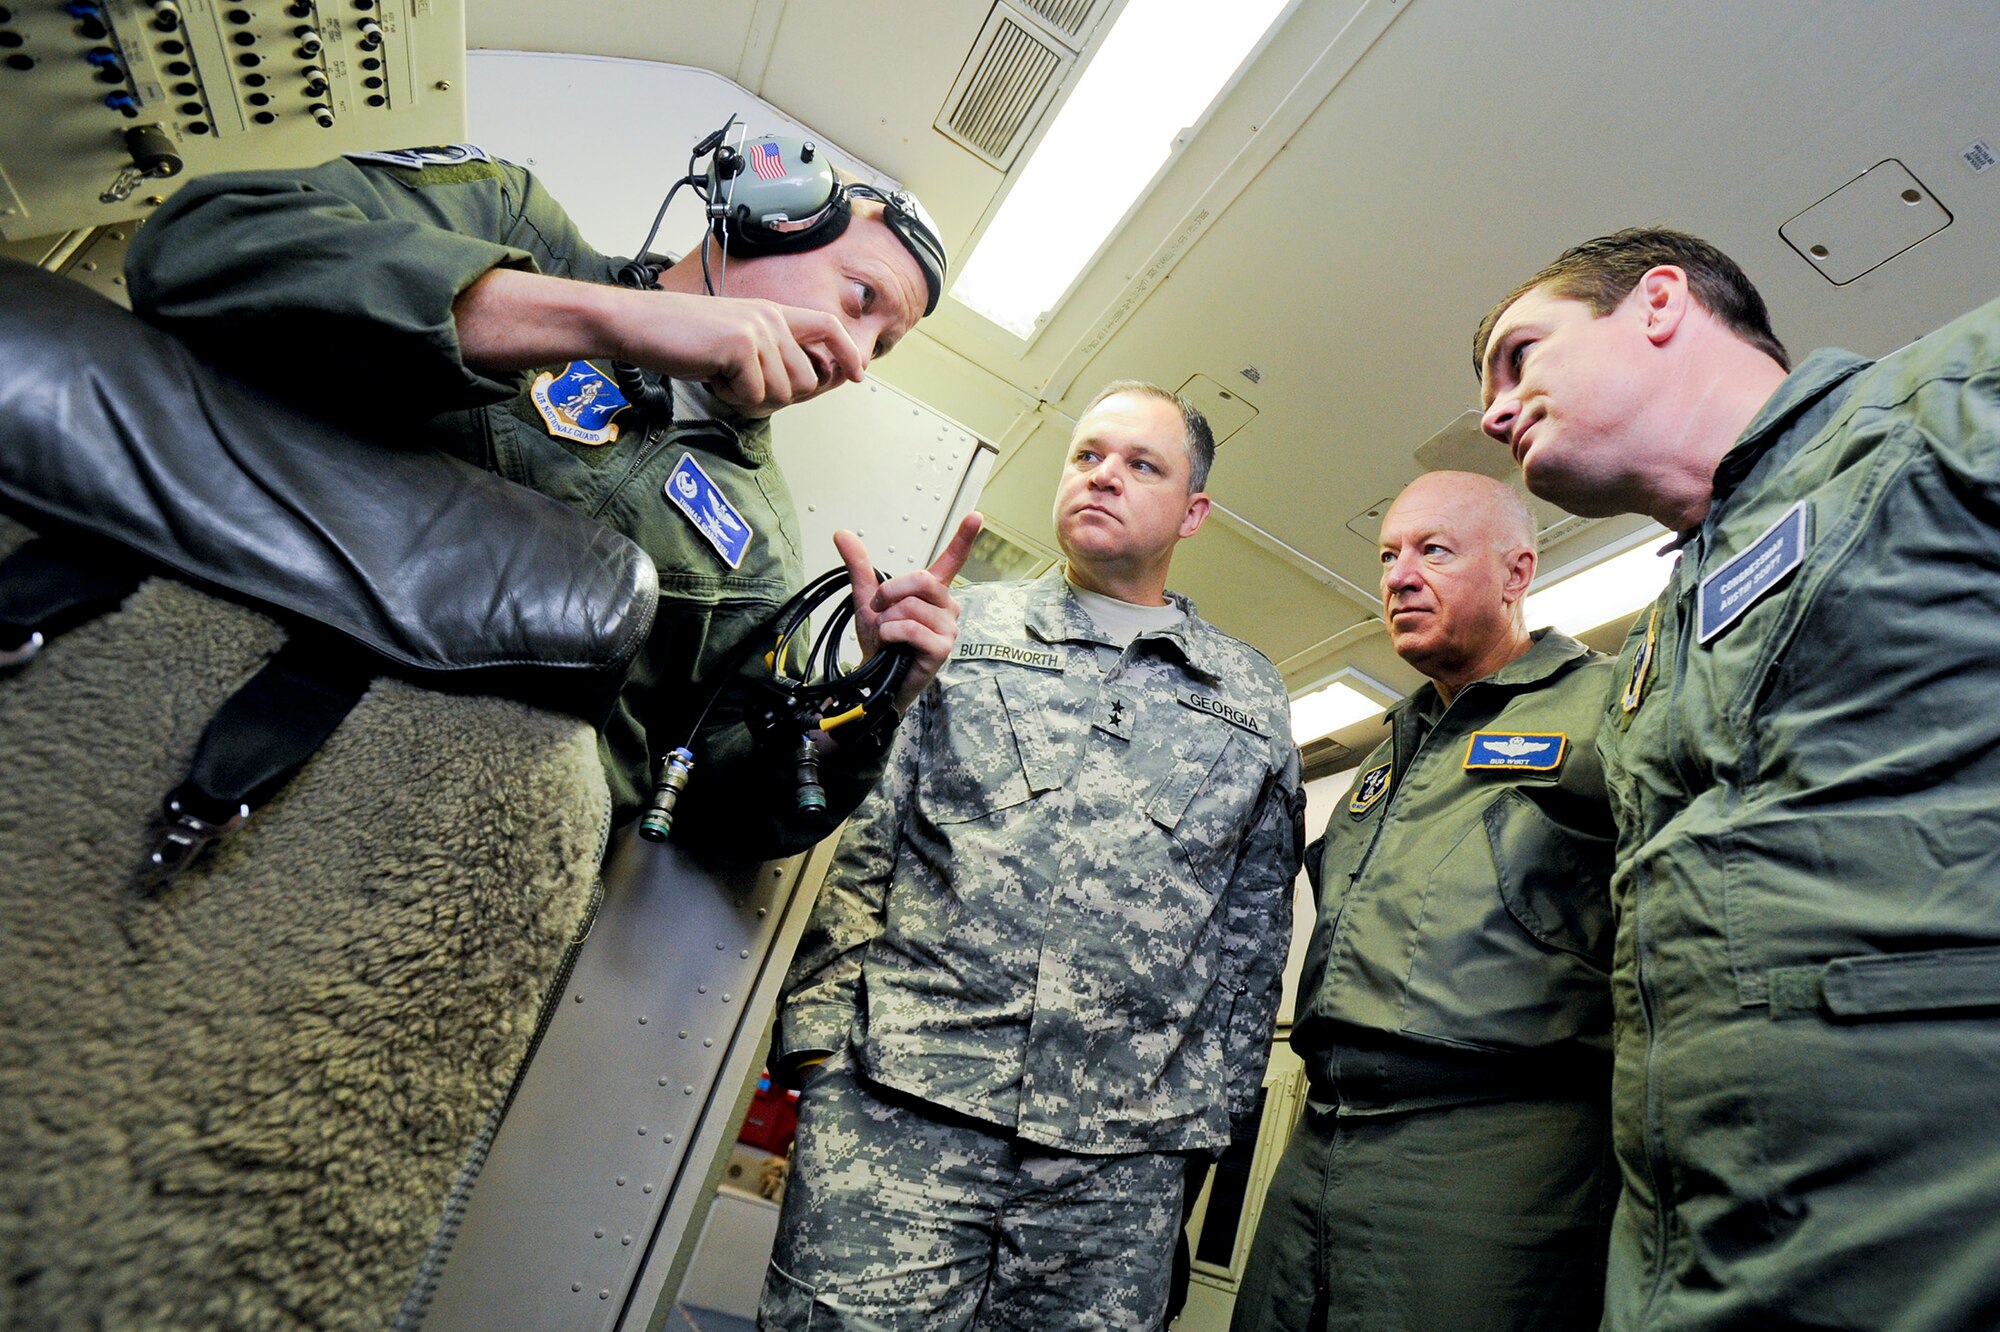 Air National Guard (ANG) Lt. Col. Thomas Grabowski, left, 116th Operations Support Squadron commander, briefs Maj. Gen. Jim Butterworth, Adjutant General of Ga., Lt. Gen. Harry Wyatt III, ANG director, and Congressman Austin Scott, on the mission and capabilities of the E-8 Joint STARS (JSTARS) during an orientation flight aboard the aircraft, Robins Air Force Base, Ga., Dec. 05, 2011.
During the training sortie, JSTARS crew members demonstrated real-world scenarios to show the versatility of the weapon system.  (National Guard photo by Master Sgt. Roger Parsons/Released)
